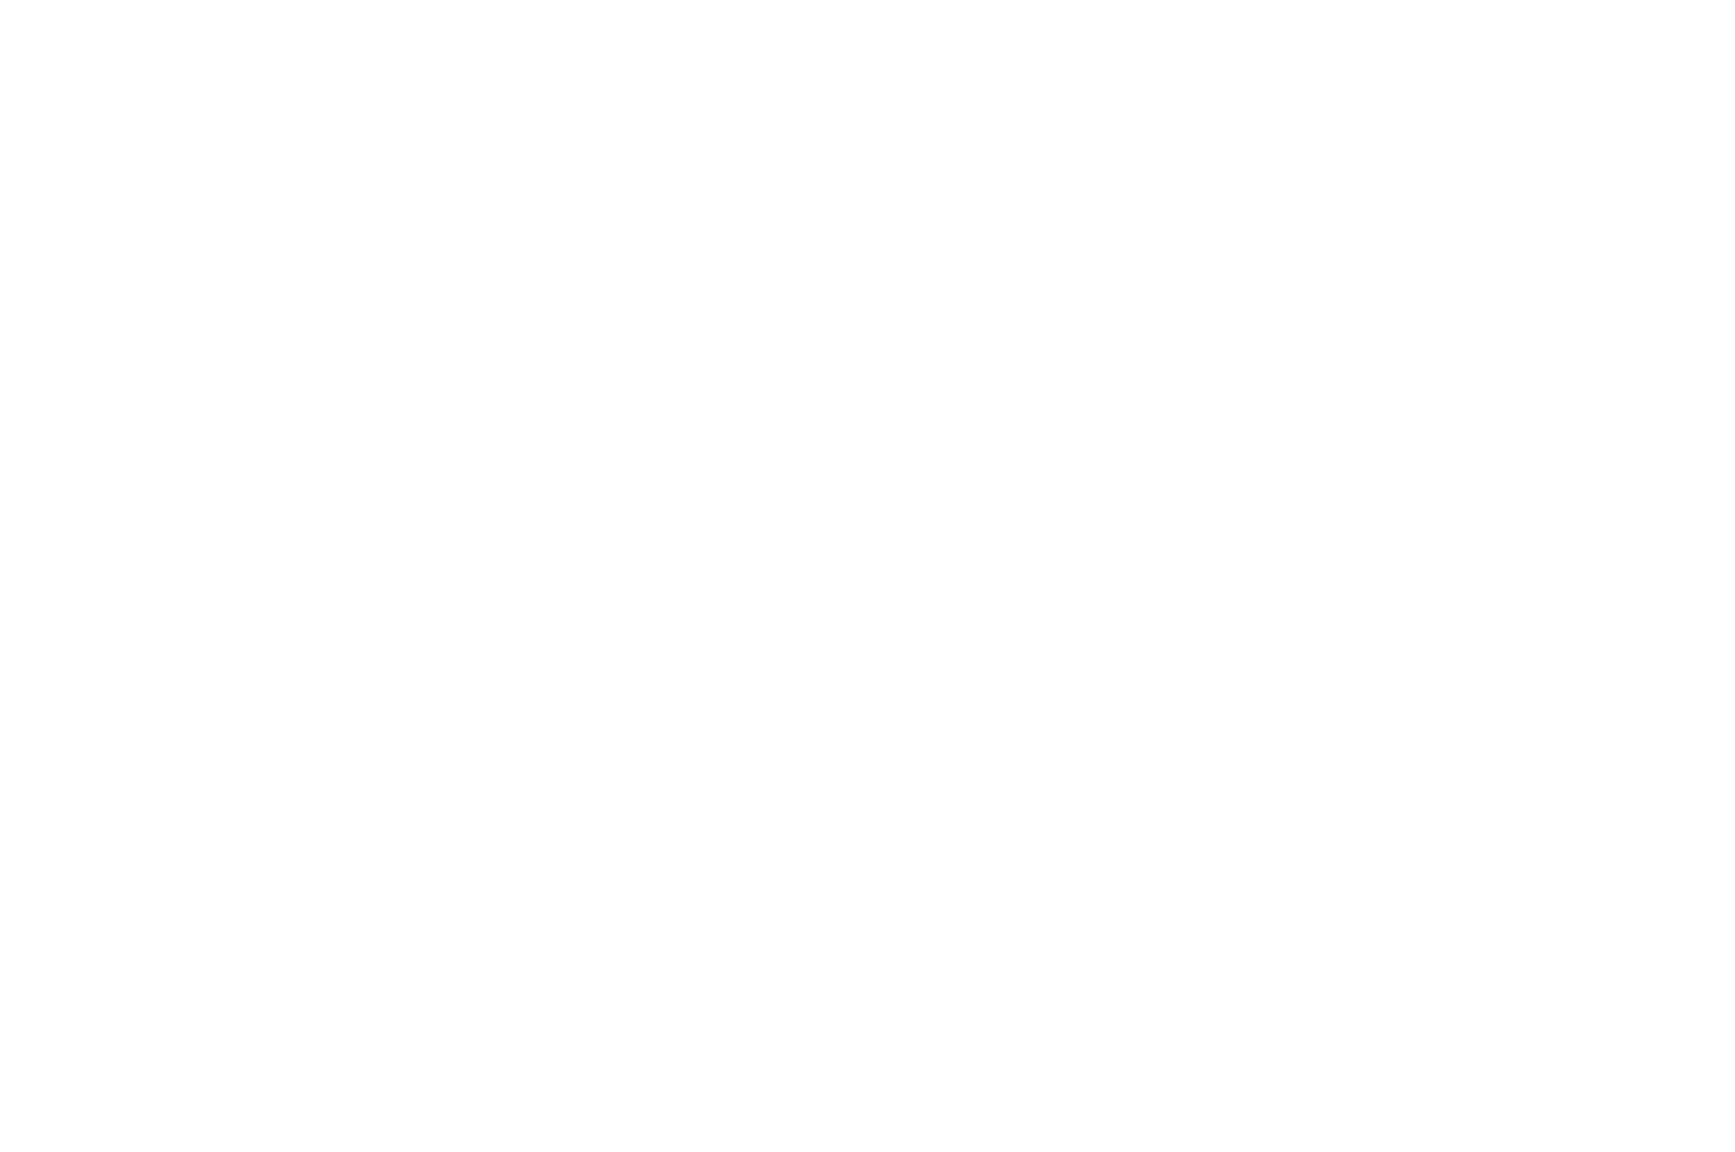 OFFICIAL SELECTION - DEPTH OF FIELD INTERNATIONAL FILM FESTIVAL - 2019.png